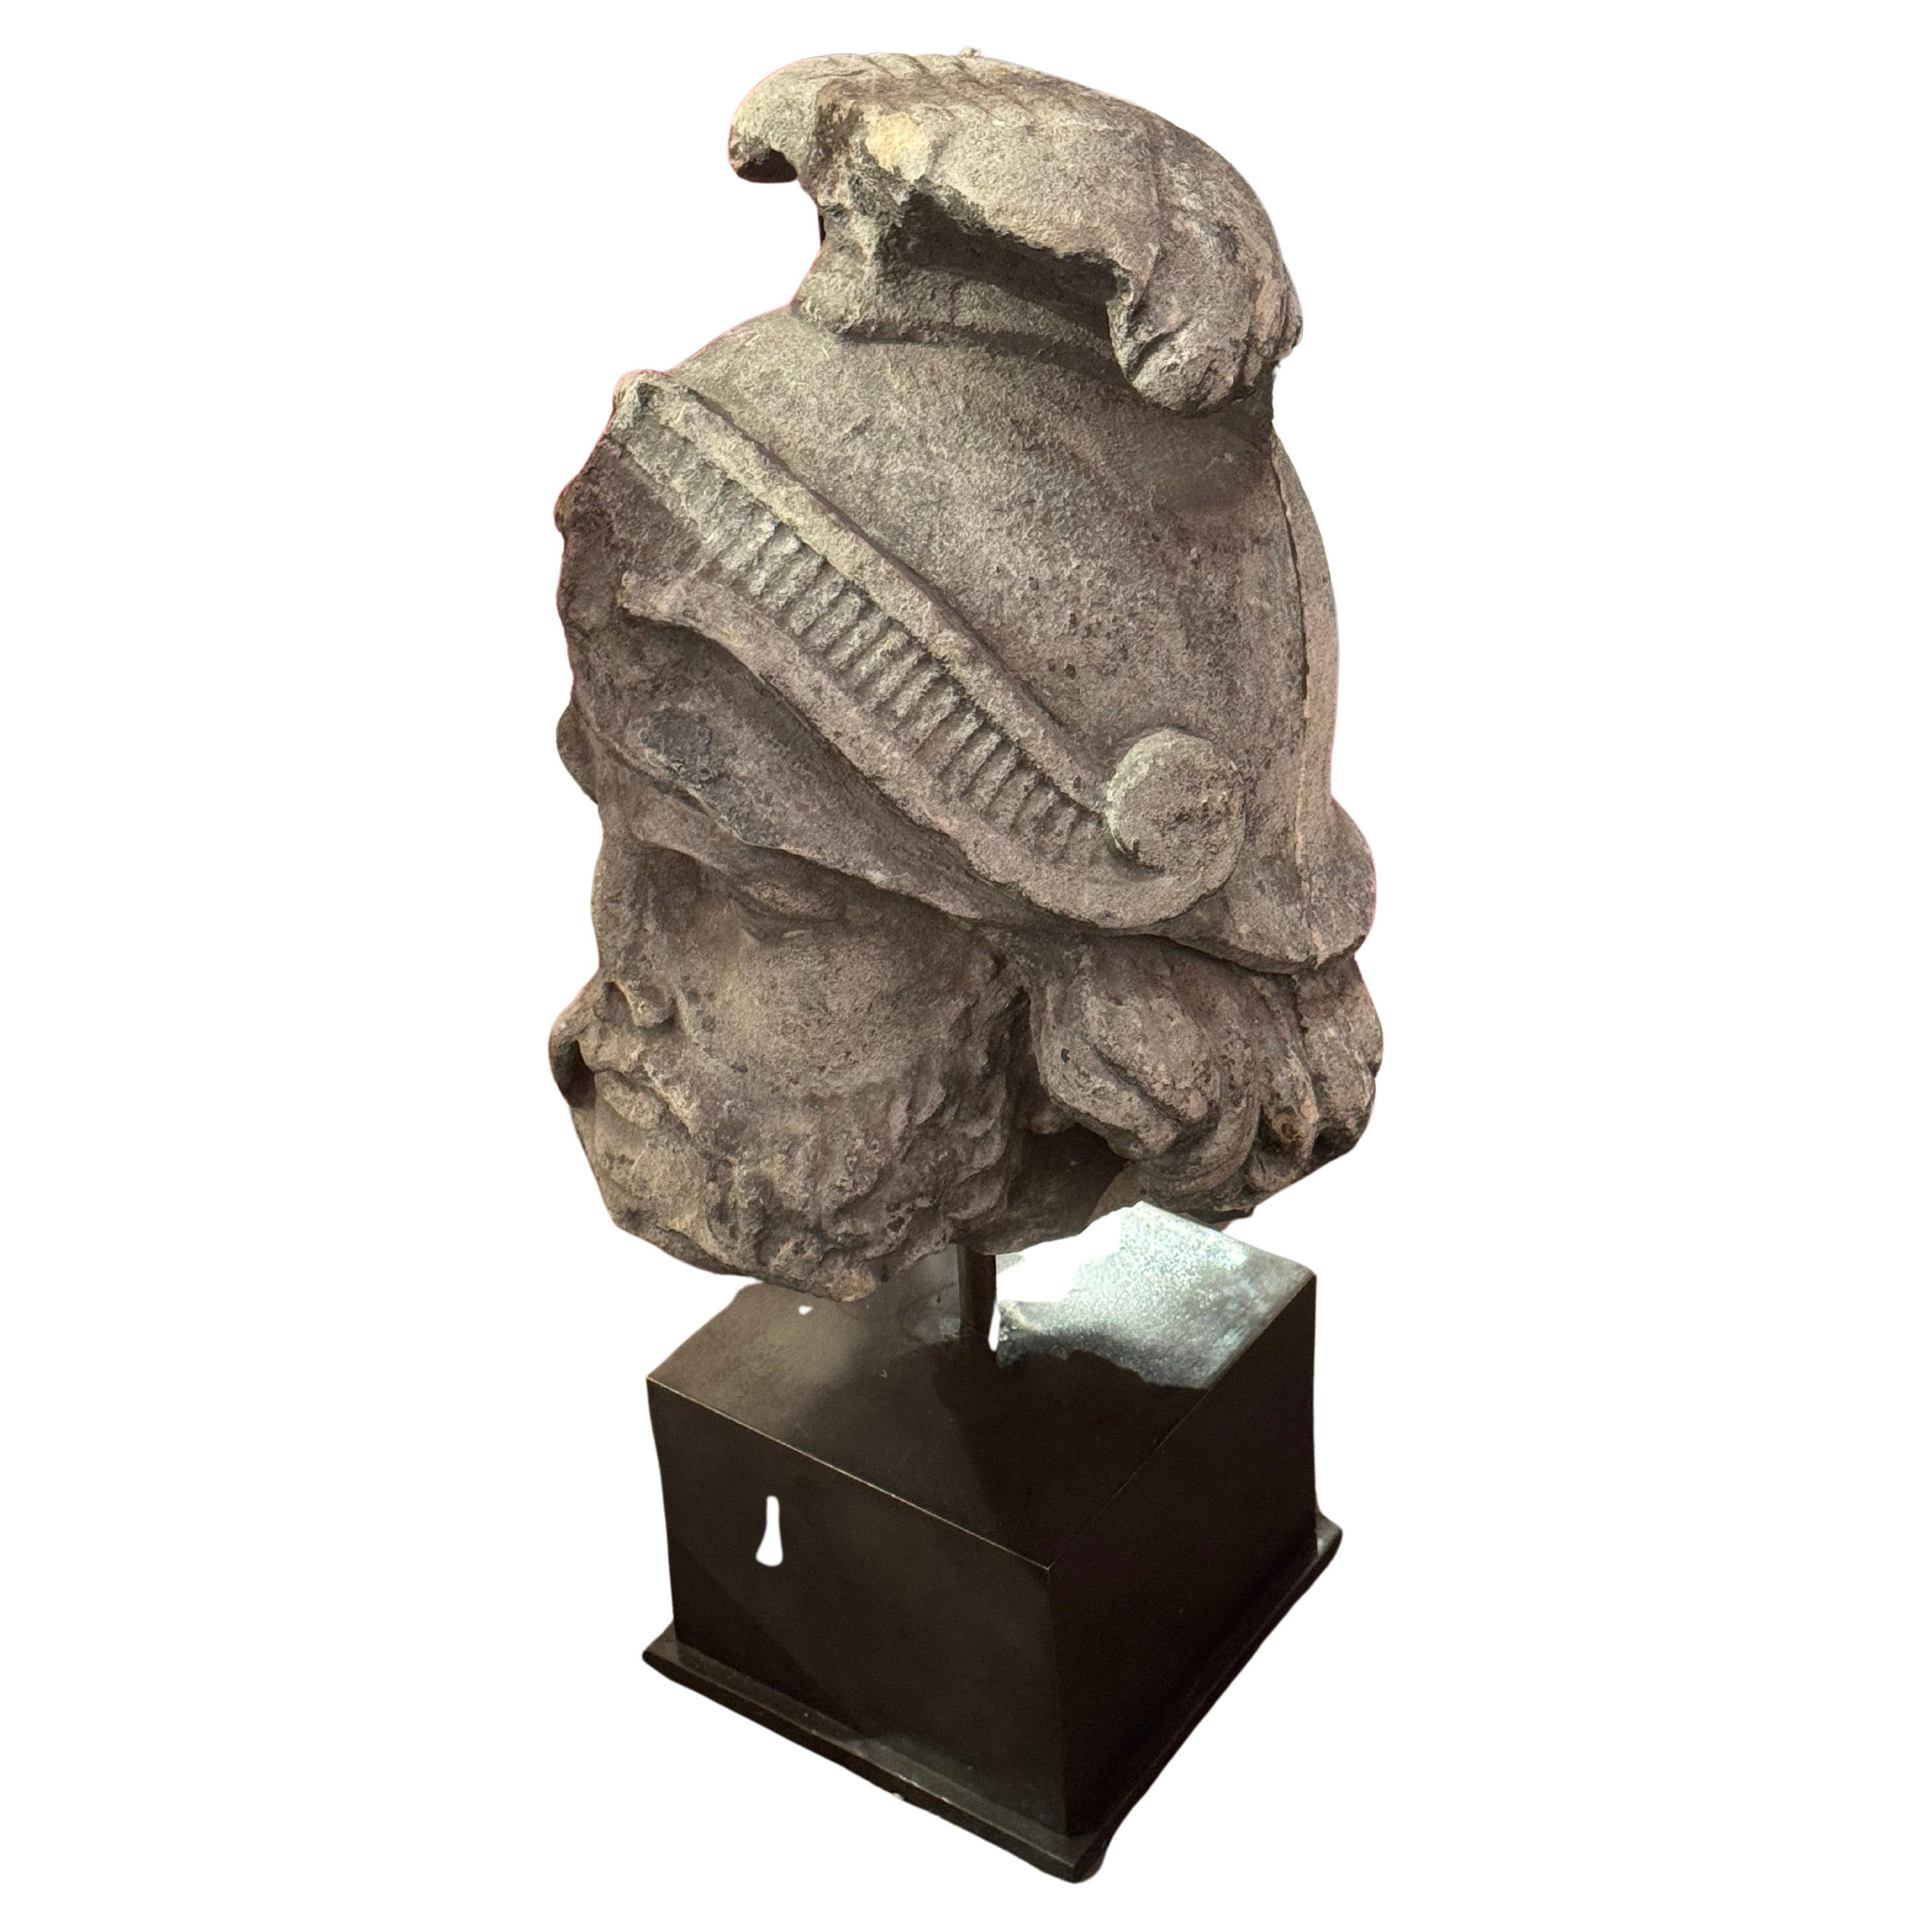 18th Century Classical Warrior Mounted Bust
Hand-Carved Out of Solid Roman Stone
Sourced from Rome, Italy by Martyn Lawrence Bullard